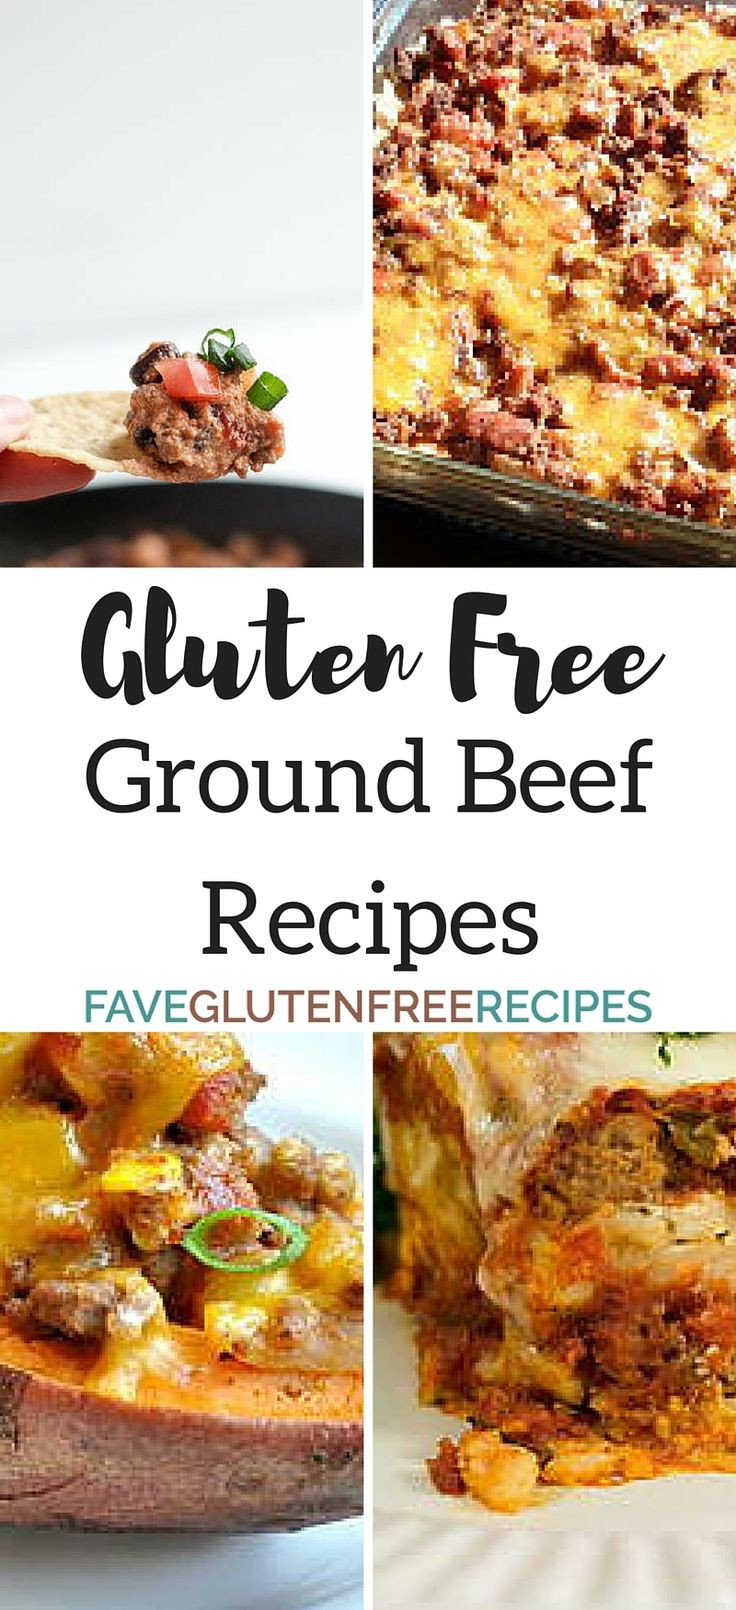 Dairy Free Ground Beef Recipes
 1000 images about GLUTIN FREE FOODS on Pinterest